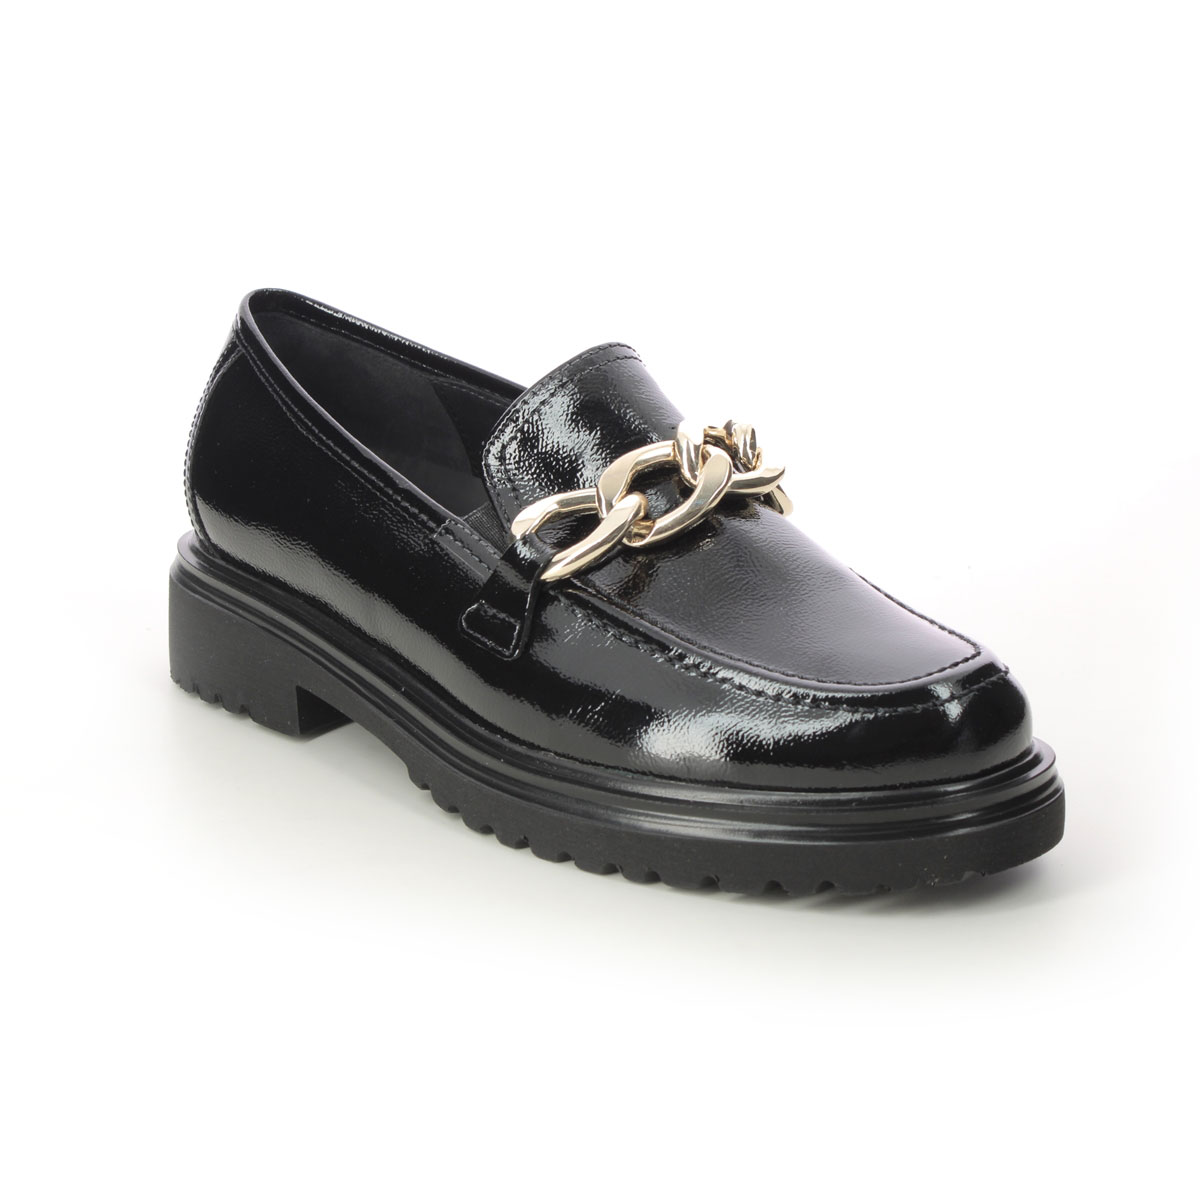 Gabor Florida H Black Patent Womens Loafers 92.554.97 In Size 5 In Plain Black Patent  Womens Comfort Slip On Shoes In Soft Black Patent Leather